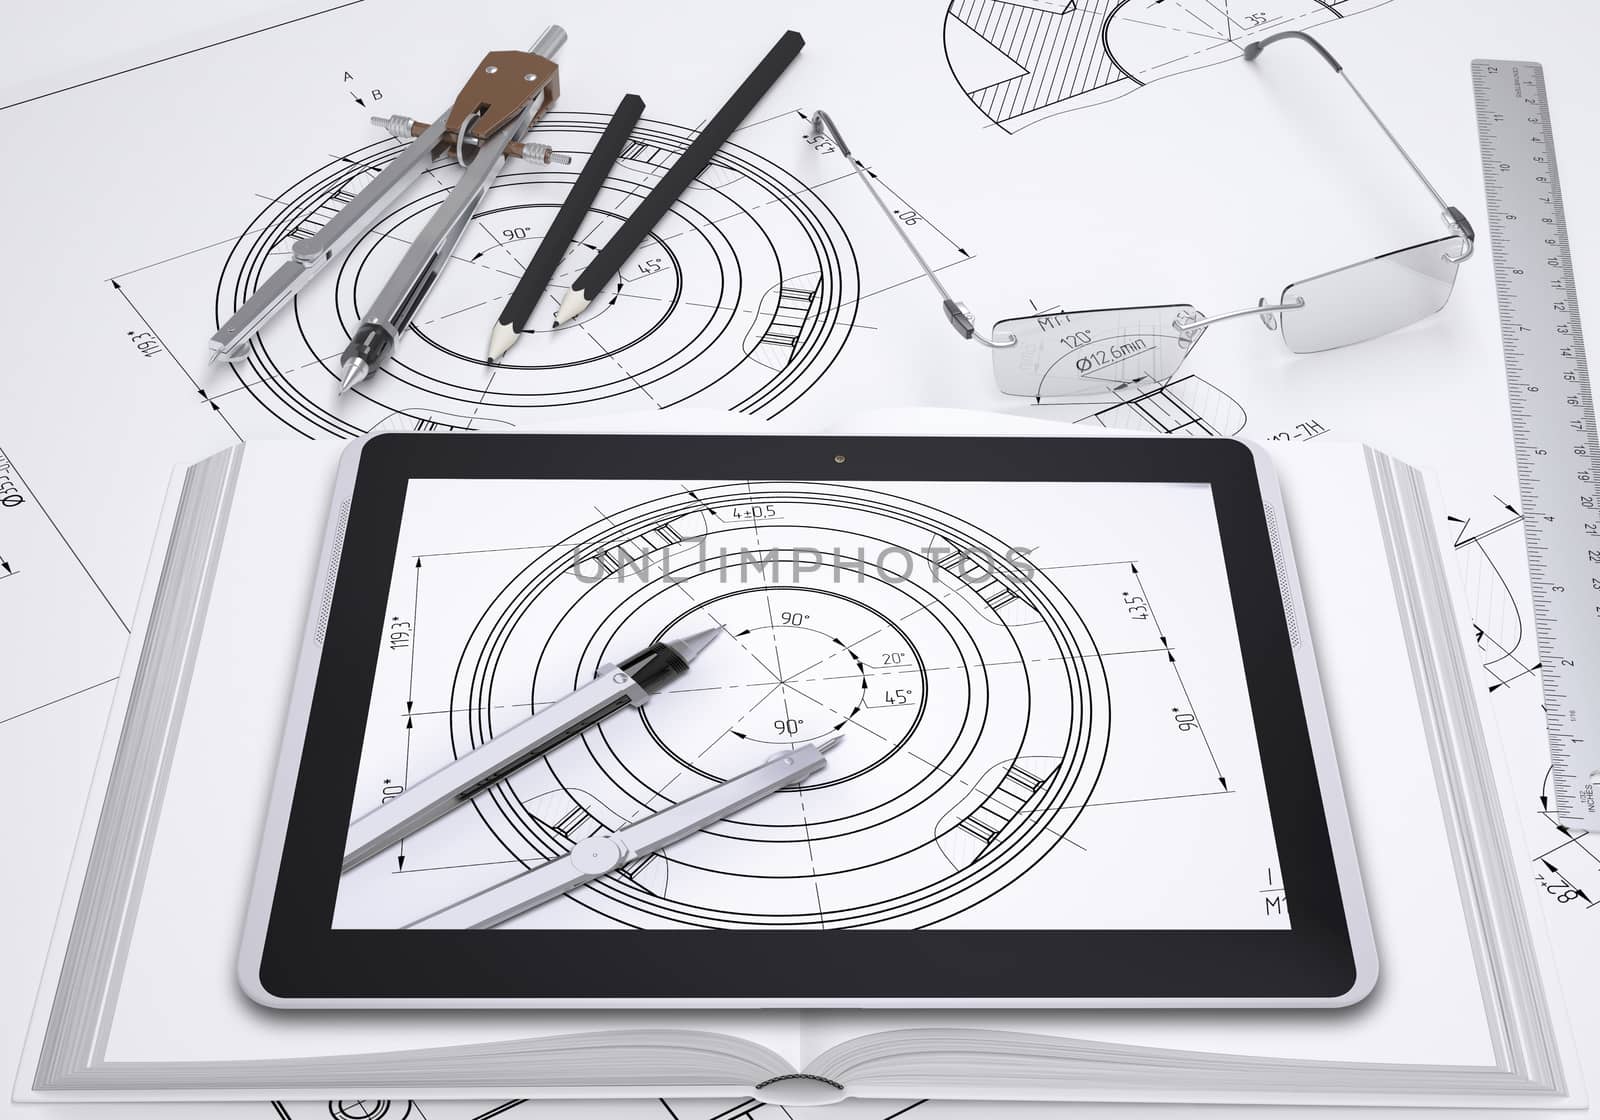 Tablet pc, drawing compasses, pencil, glasses and ruler placed on spead technical drawing. Screen of pc shows part of same drawing.